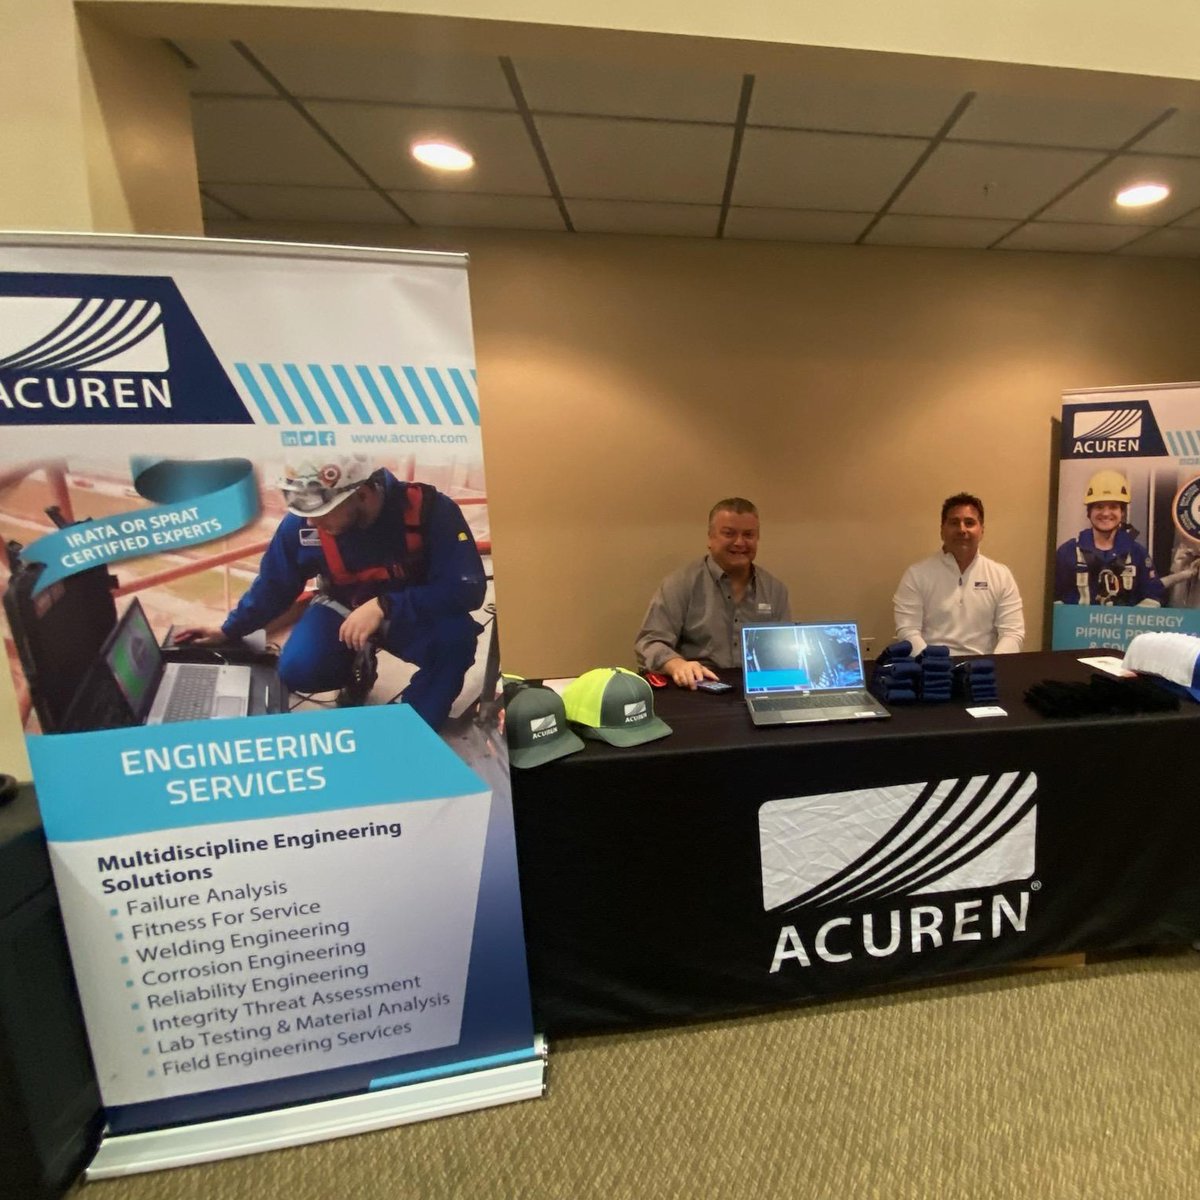 #Manufacturing is one of the largest sectors at the #OMJAllenSpringCareerFair! Stop in at the UNOH Event Center, 10am-2pm, to talk with 120+ #AllenCounty employers!

#CareerFair #JobFair #OhioMeansJobs #Careers #GDLS #BobEvans #SRK #Acuren